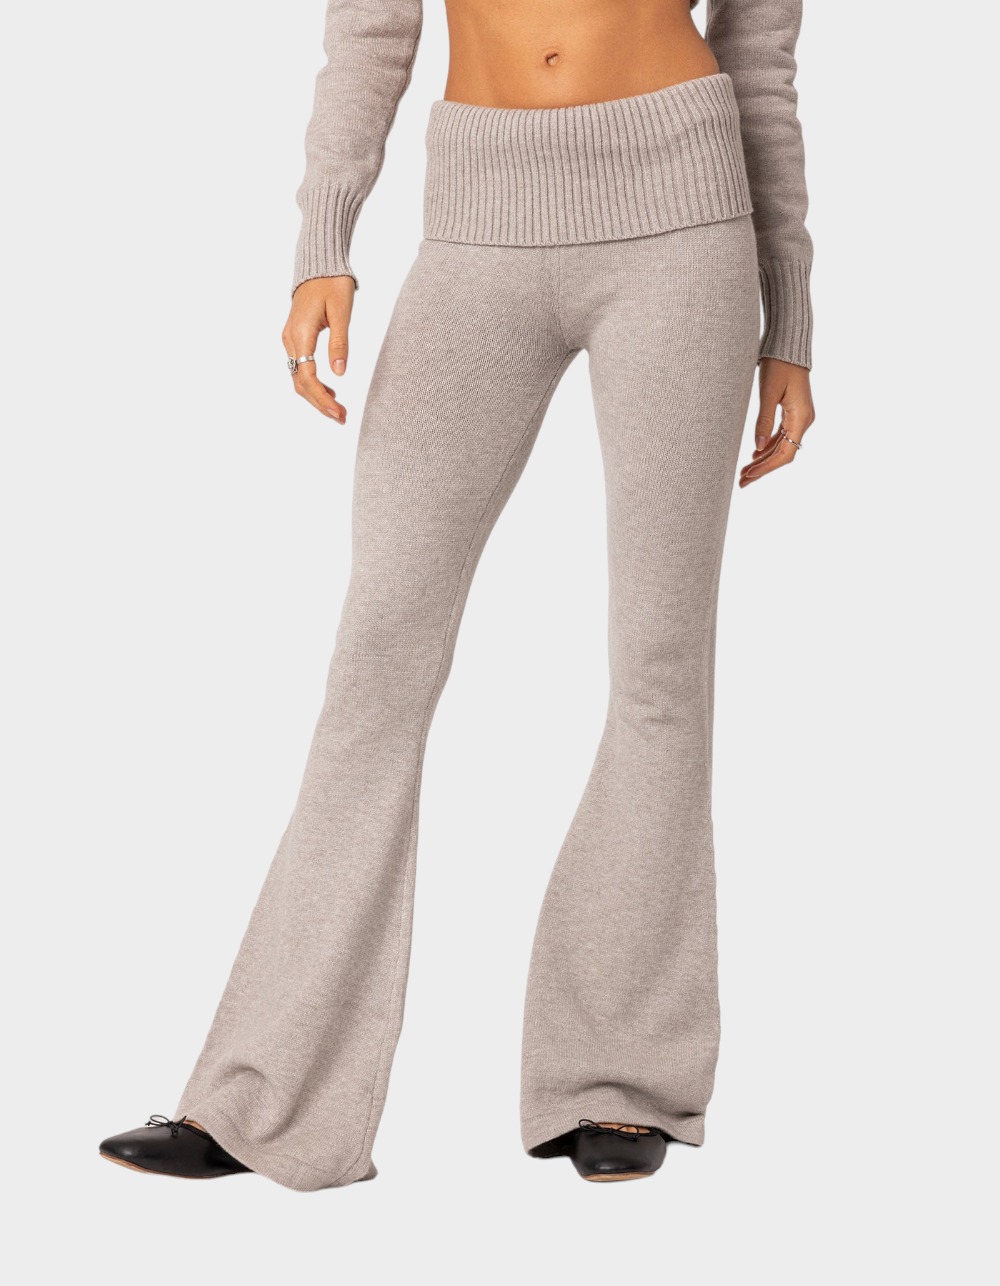 EDIKTED Desiree Knitted Low Rise Fold Over Pants - GRAY | Tillys